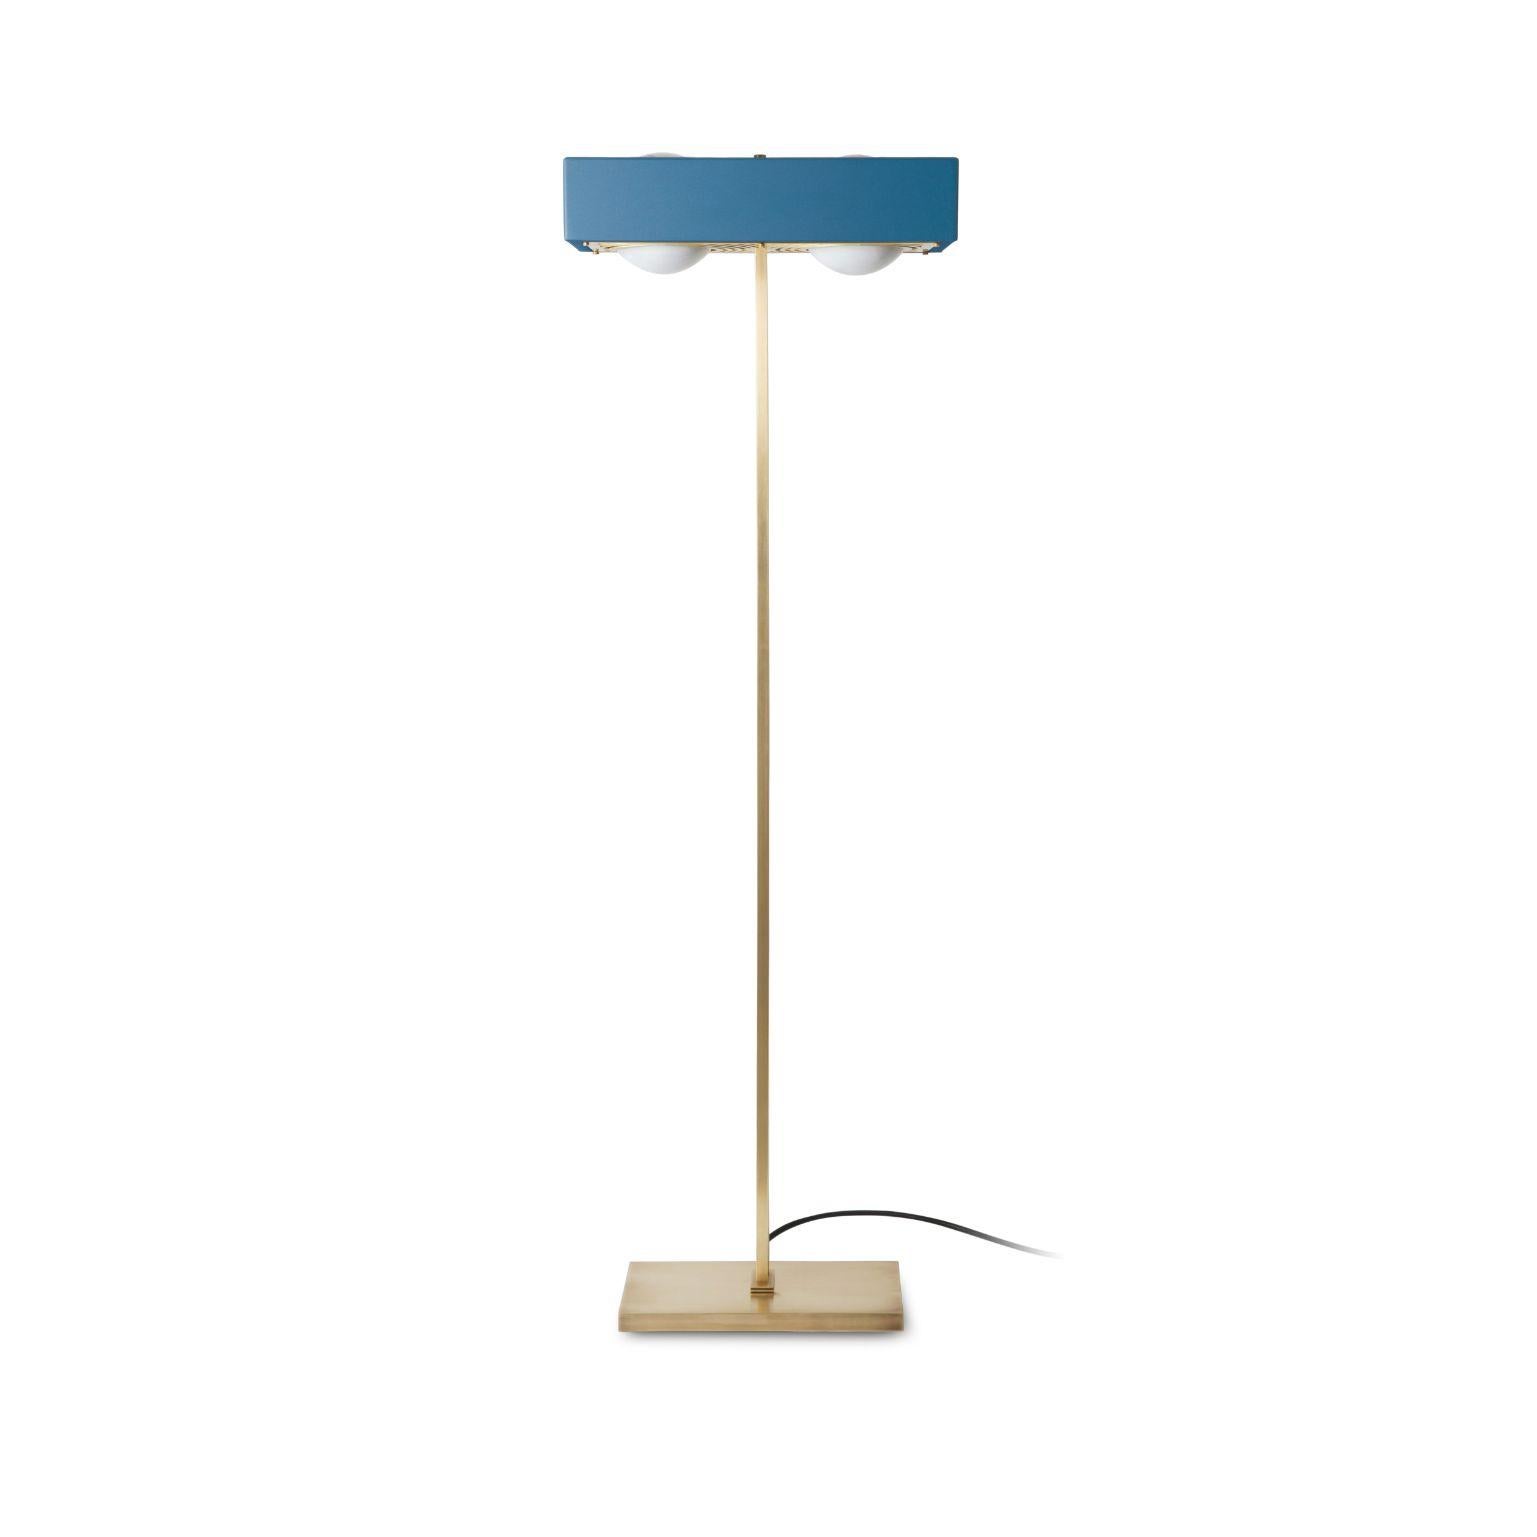 Kernal floor light - Blue by Bert Frank
Dimensions: 125 x 40 x 30 cm
Materials: Brass, steel

Brushed brass lacquered as standard, custom finishes available.

When Adam Yeats and Robbie Llewellyn founded Bert Frank in 2013 it was a meeting of minds